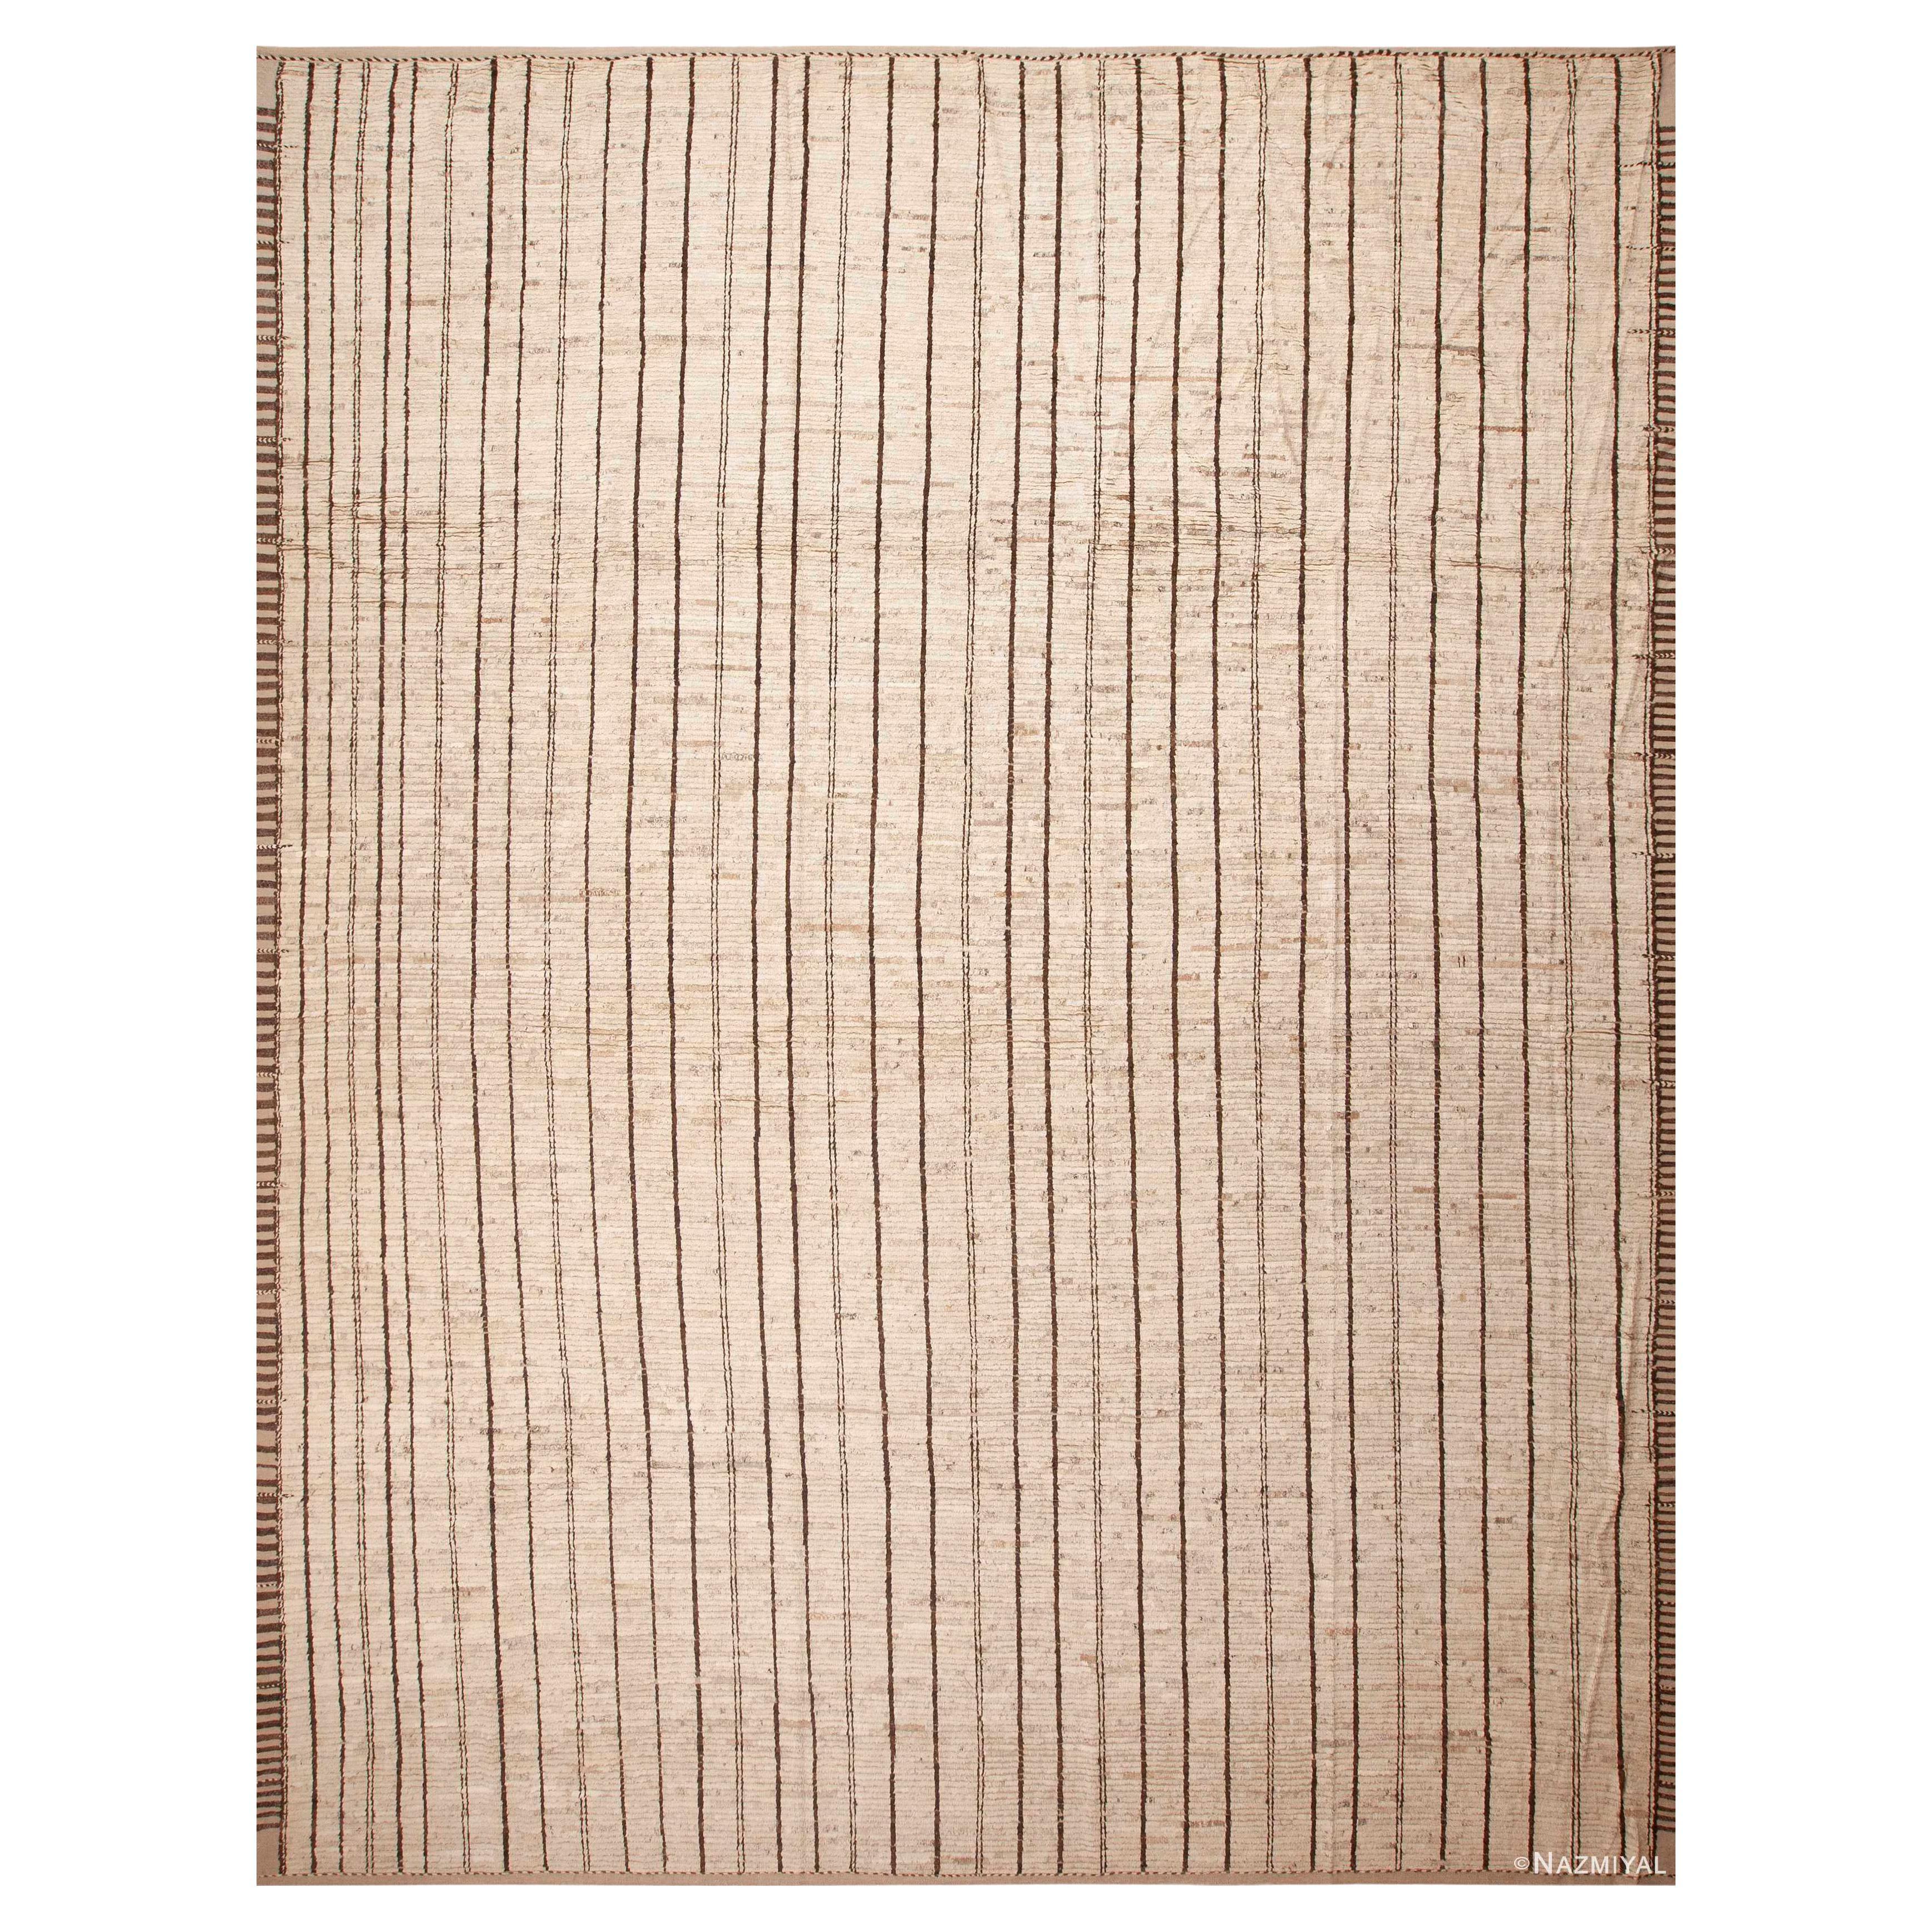 Nazmiyal Collection Minimalist Stripped Pattern Modern Area Rug 14' x 17'7" For Sale